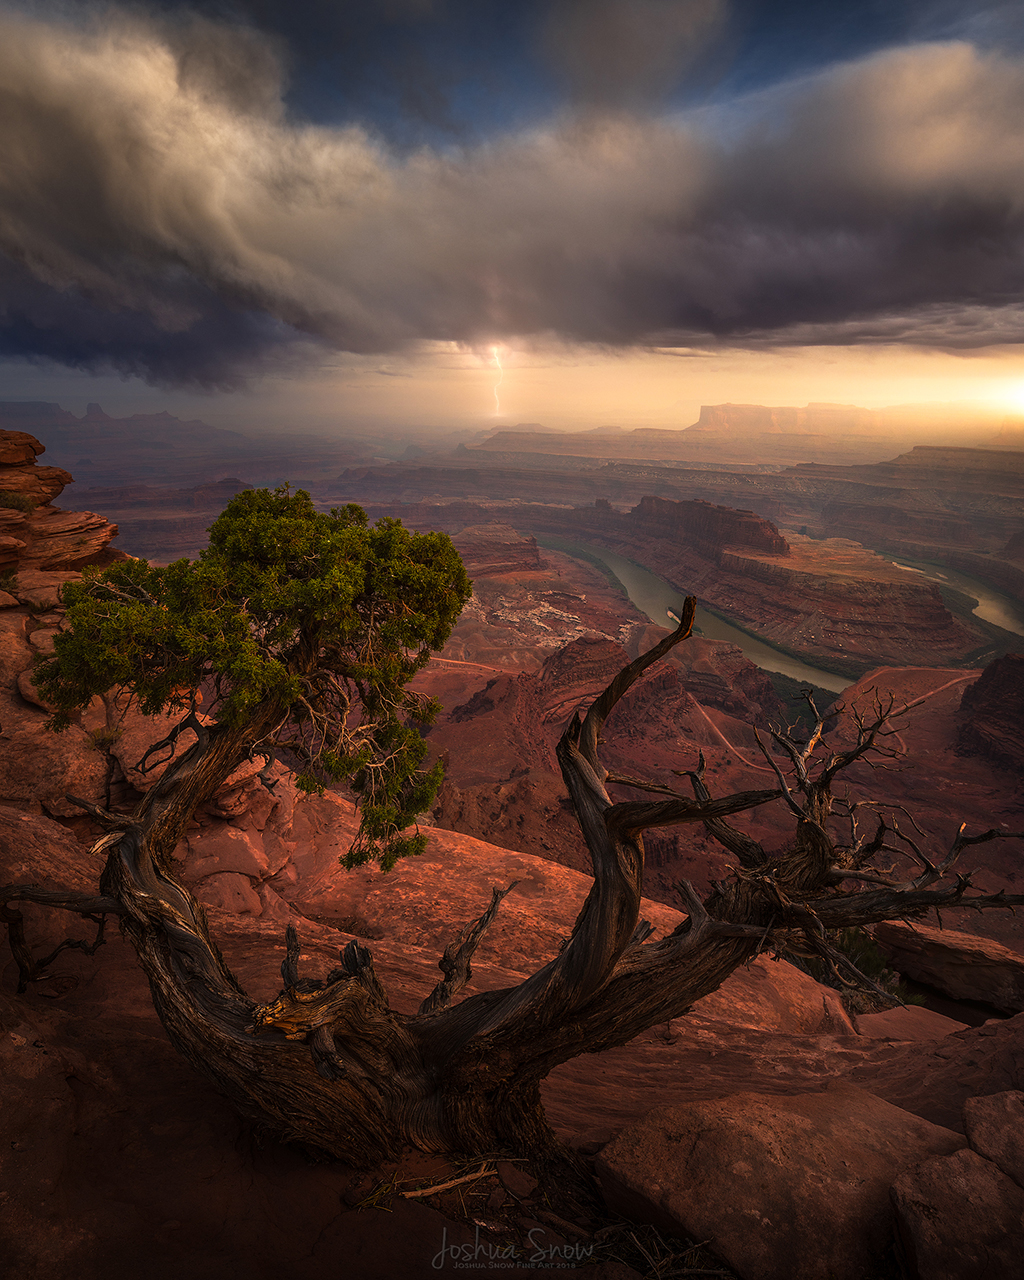 Congratulations to Joshua Snow for winning the recent Calm Before The Storm Assignment with the image, “By a Thread.”